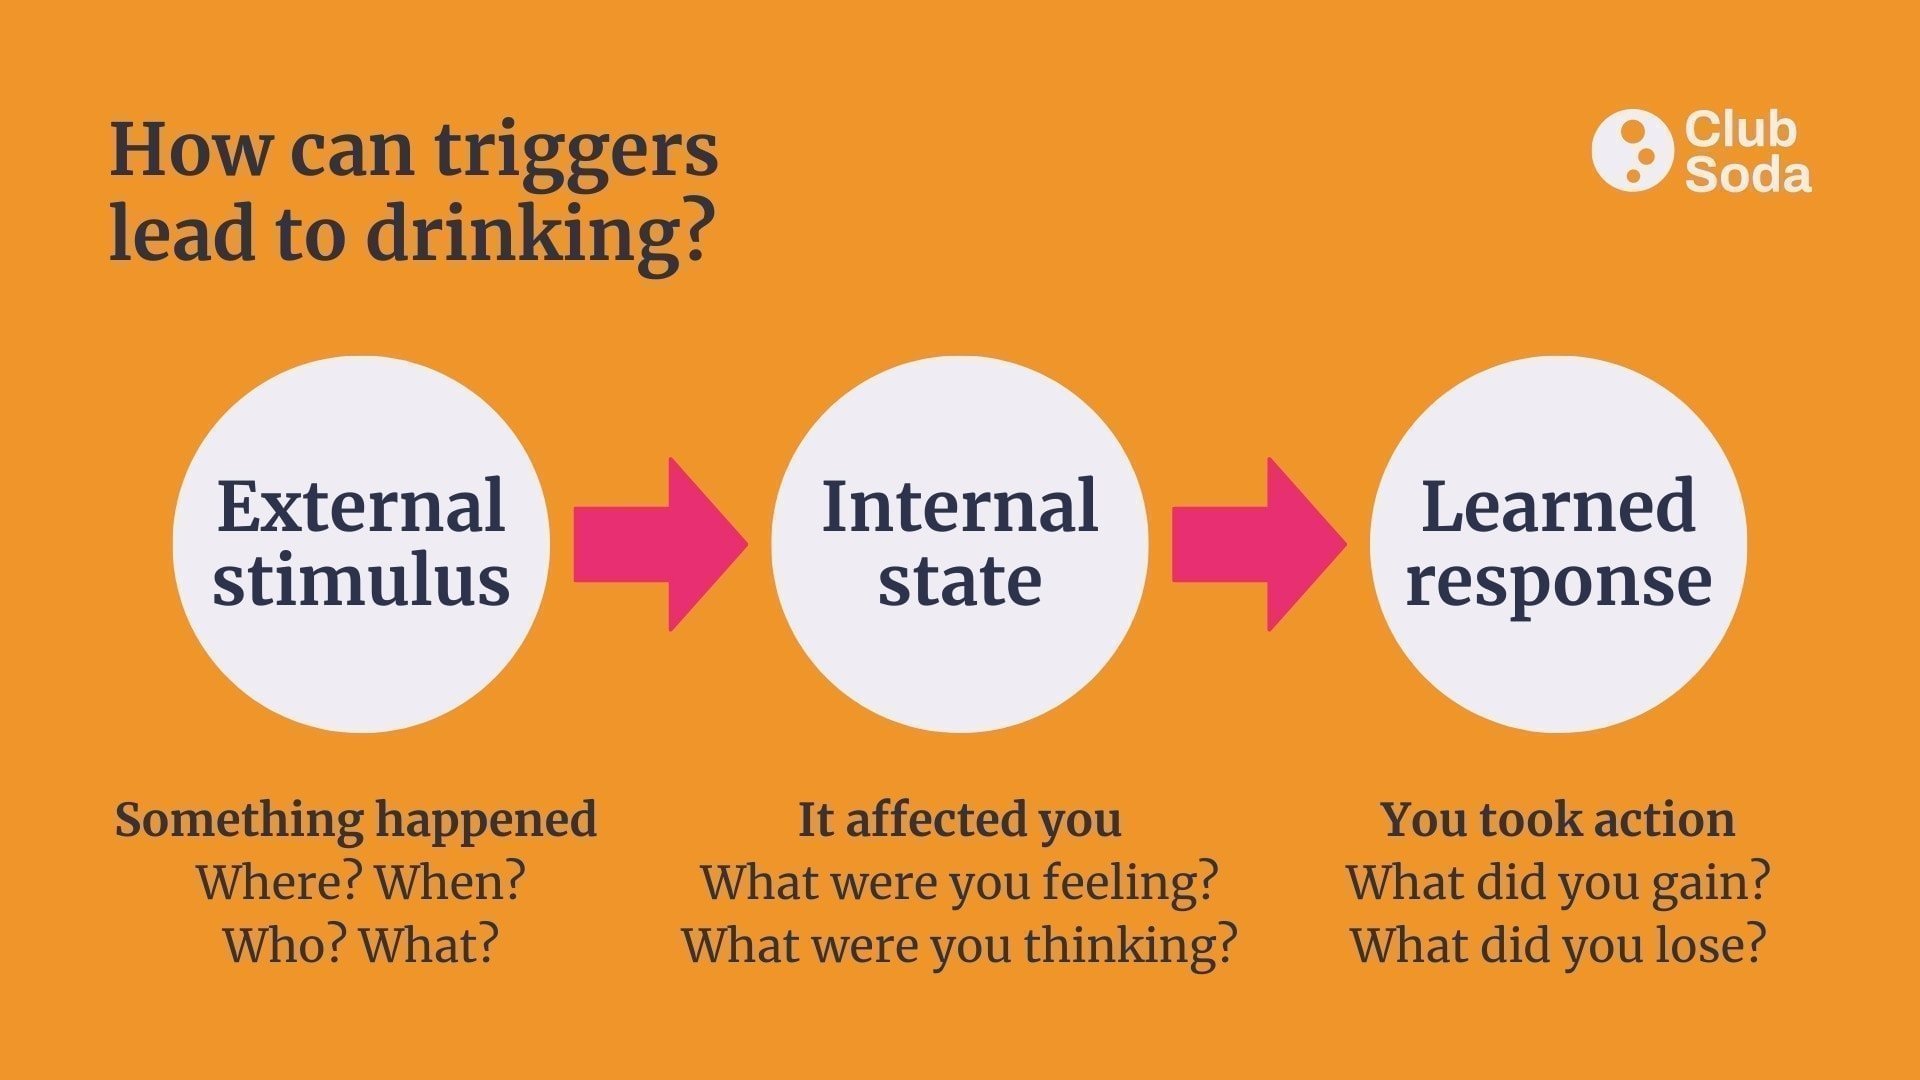 Graphic: How can triggers lead to drinking?

External stimulus. Something happened. Where? When? Who? What?
Internal state. It affected you. What were you feeling? What were you think?
Learned response. You took action. What did you gain? What did you lose?